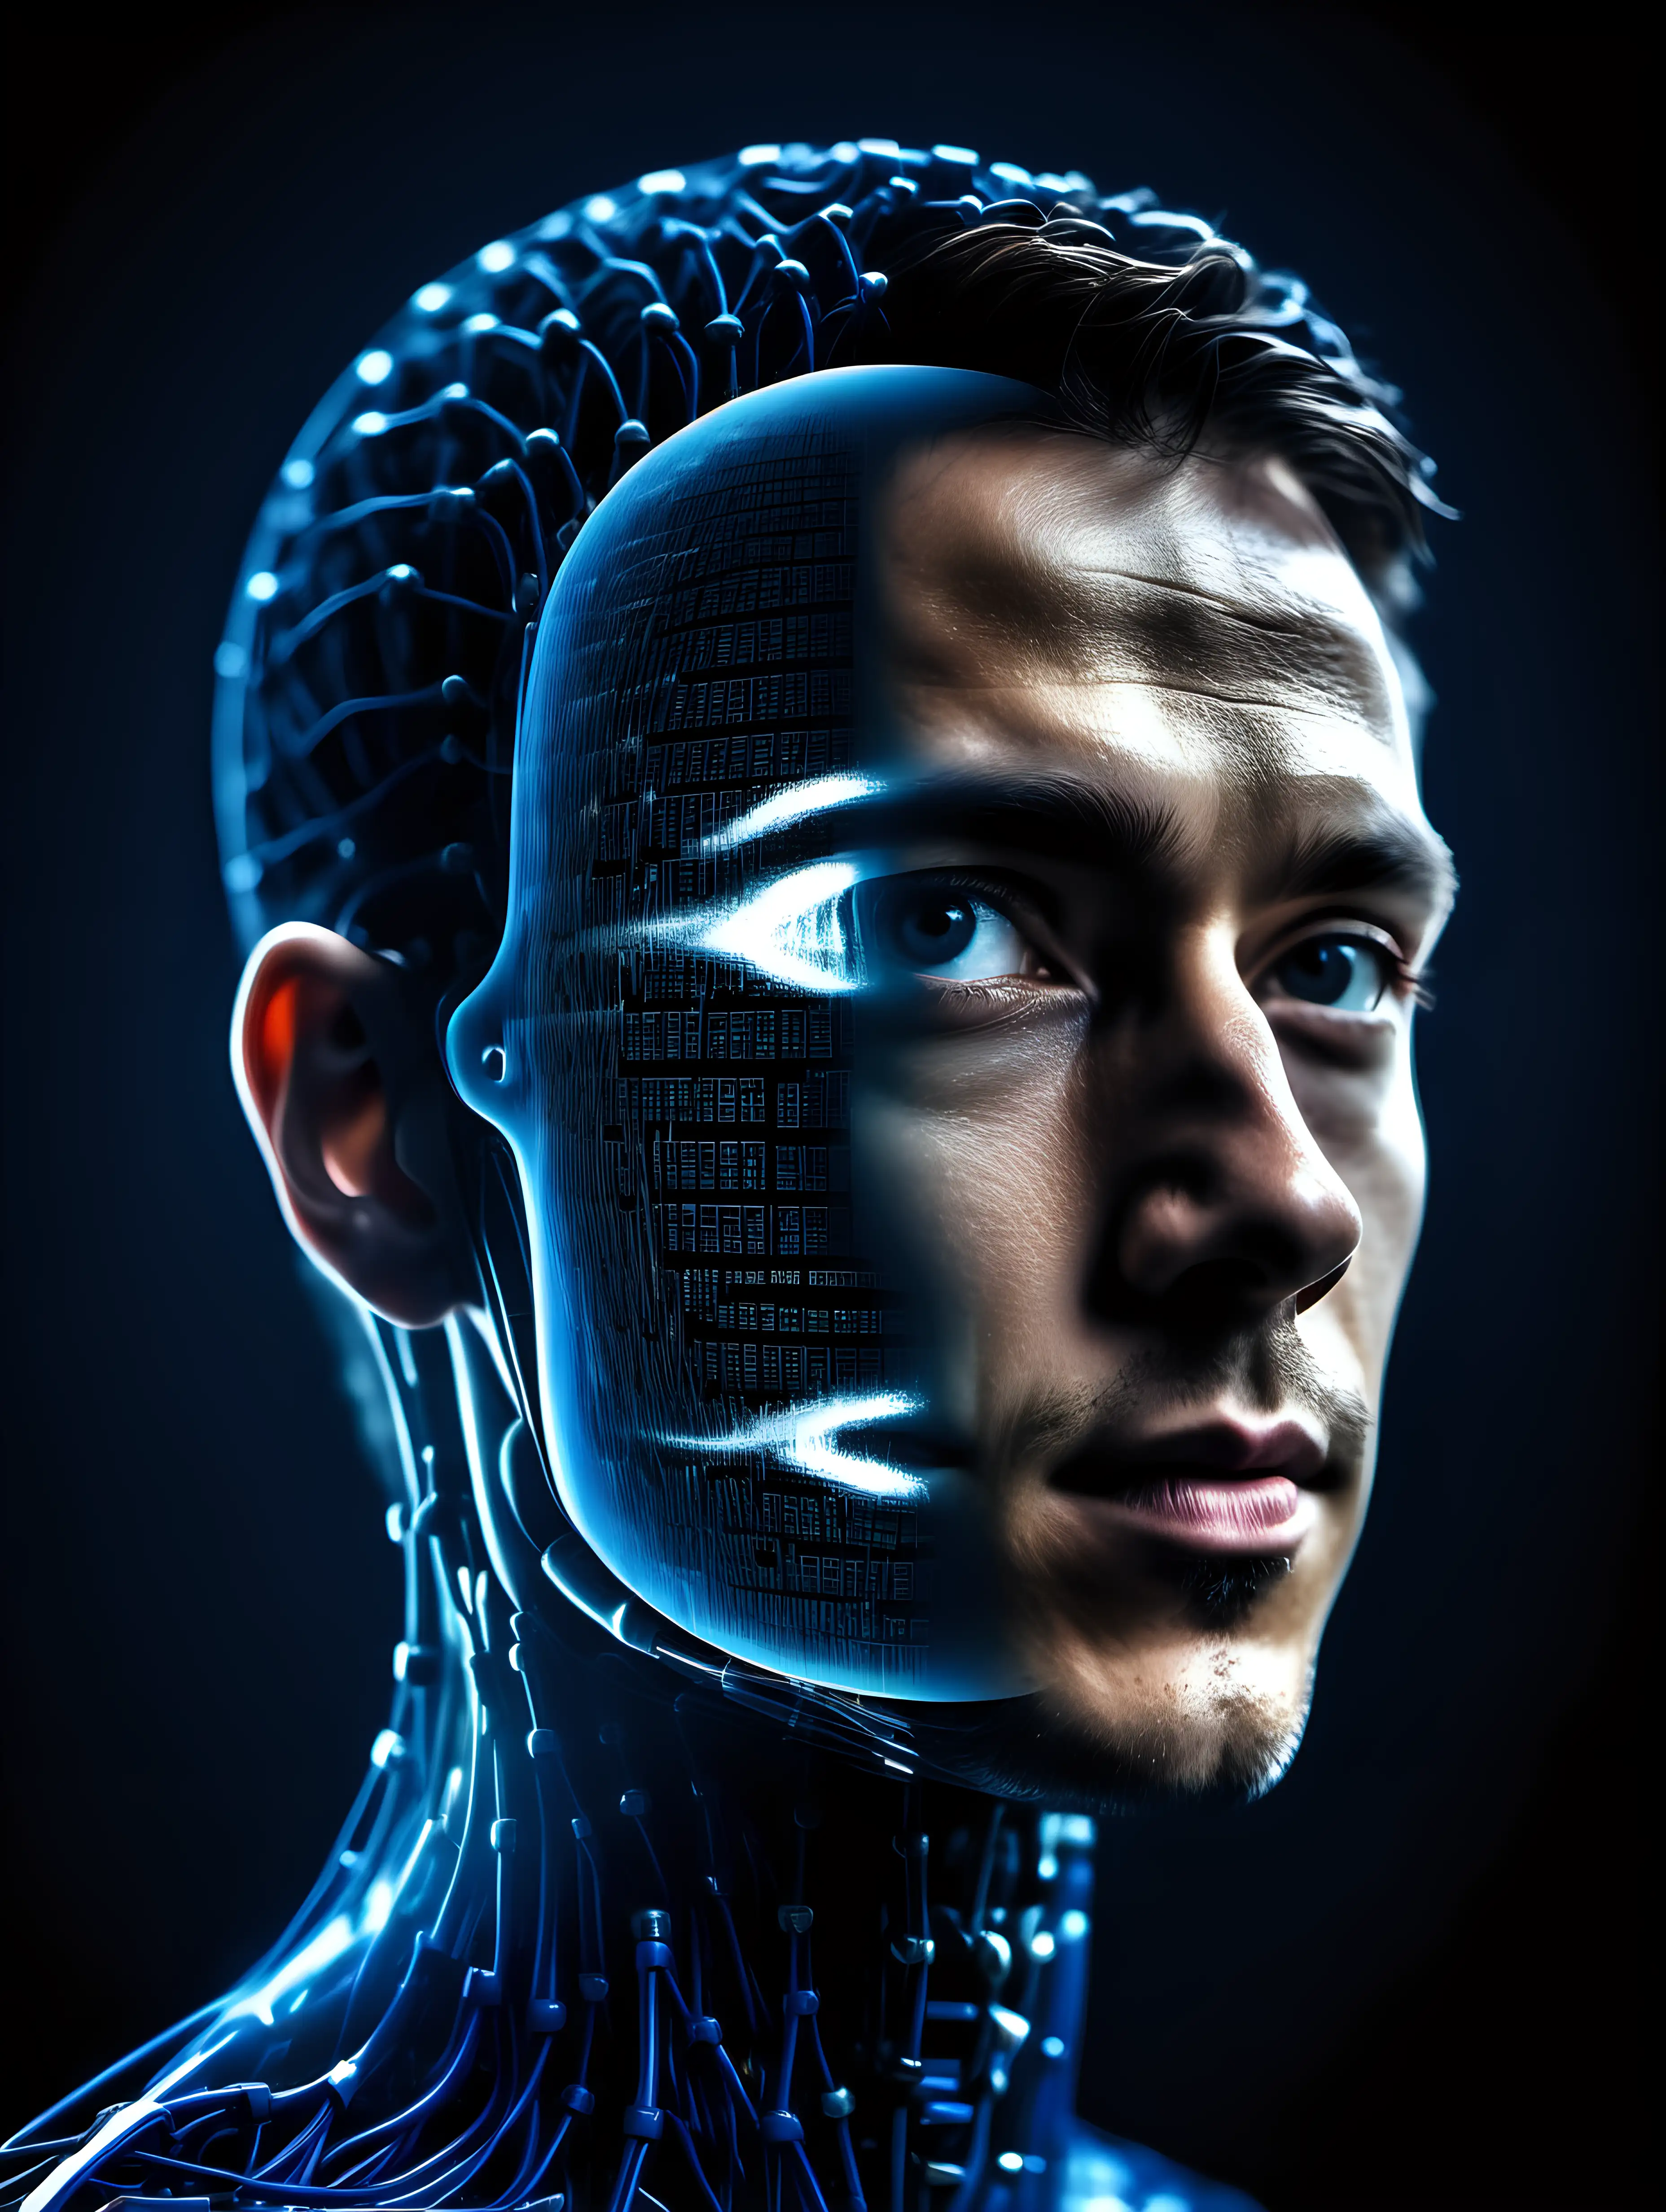 Futuristic HumanRobot Fusion Portrait with Neural Network Vibes